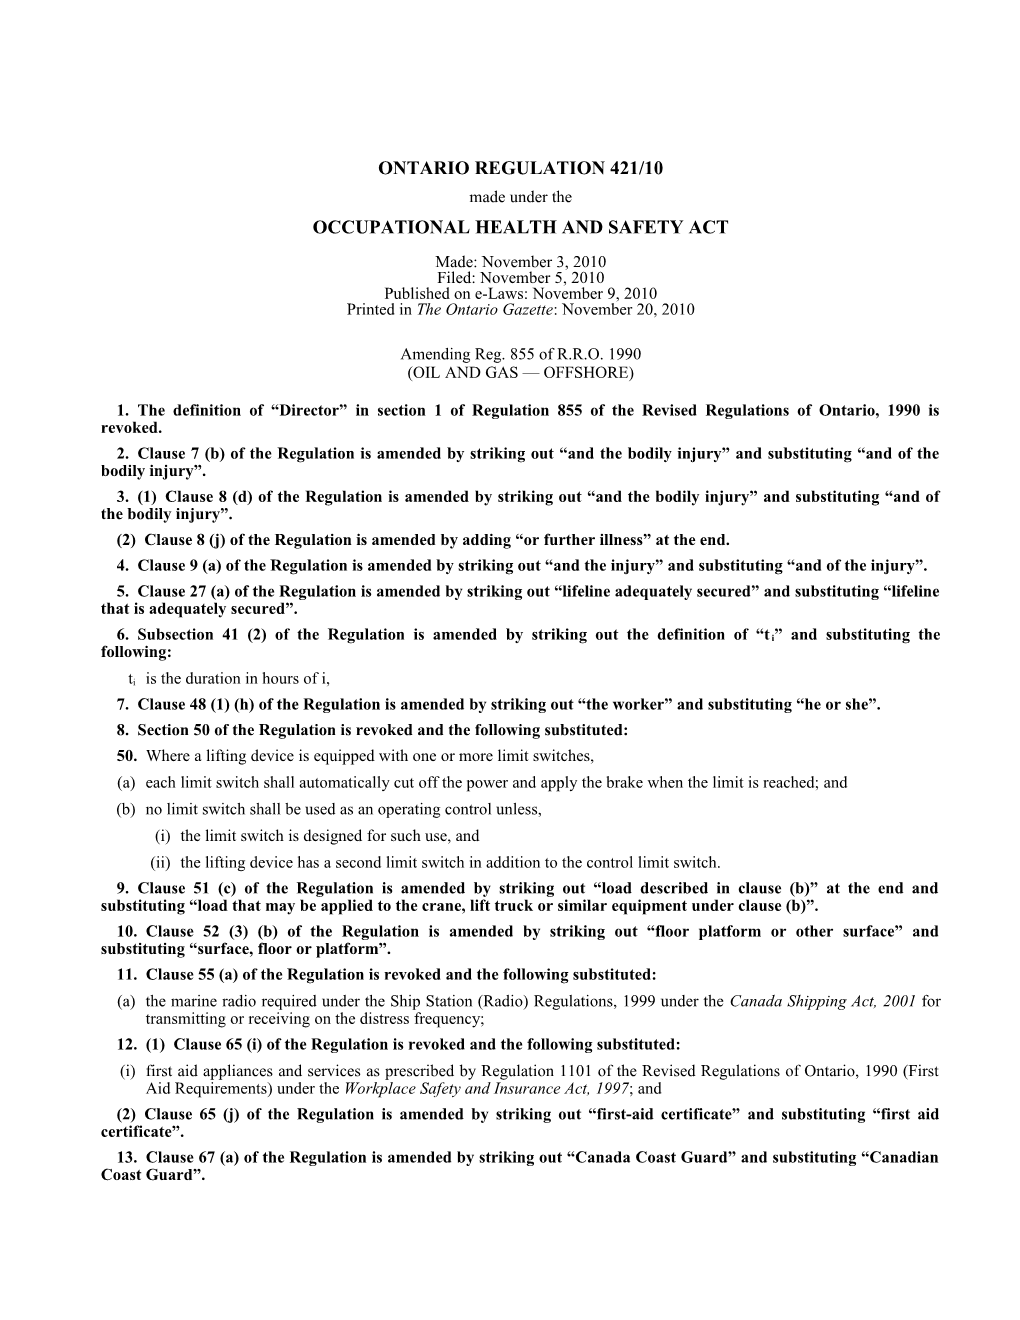 OCCUPATIONAL HEALTH and SAFETY ACT - O. Reg. 421/10